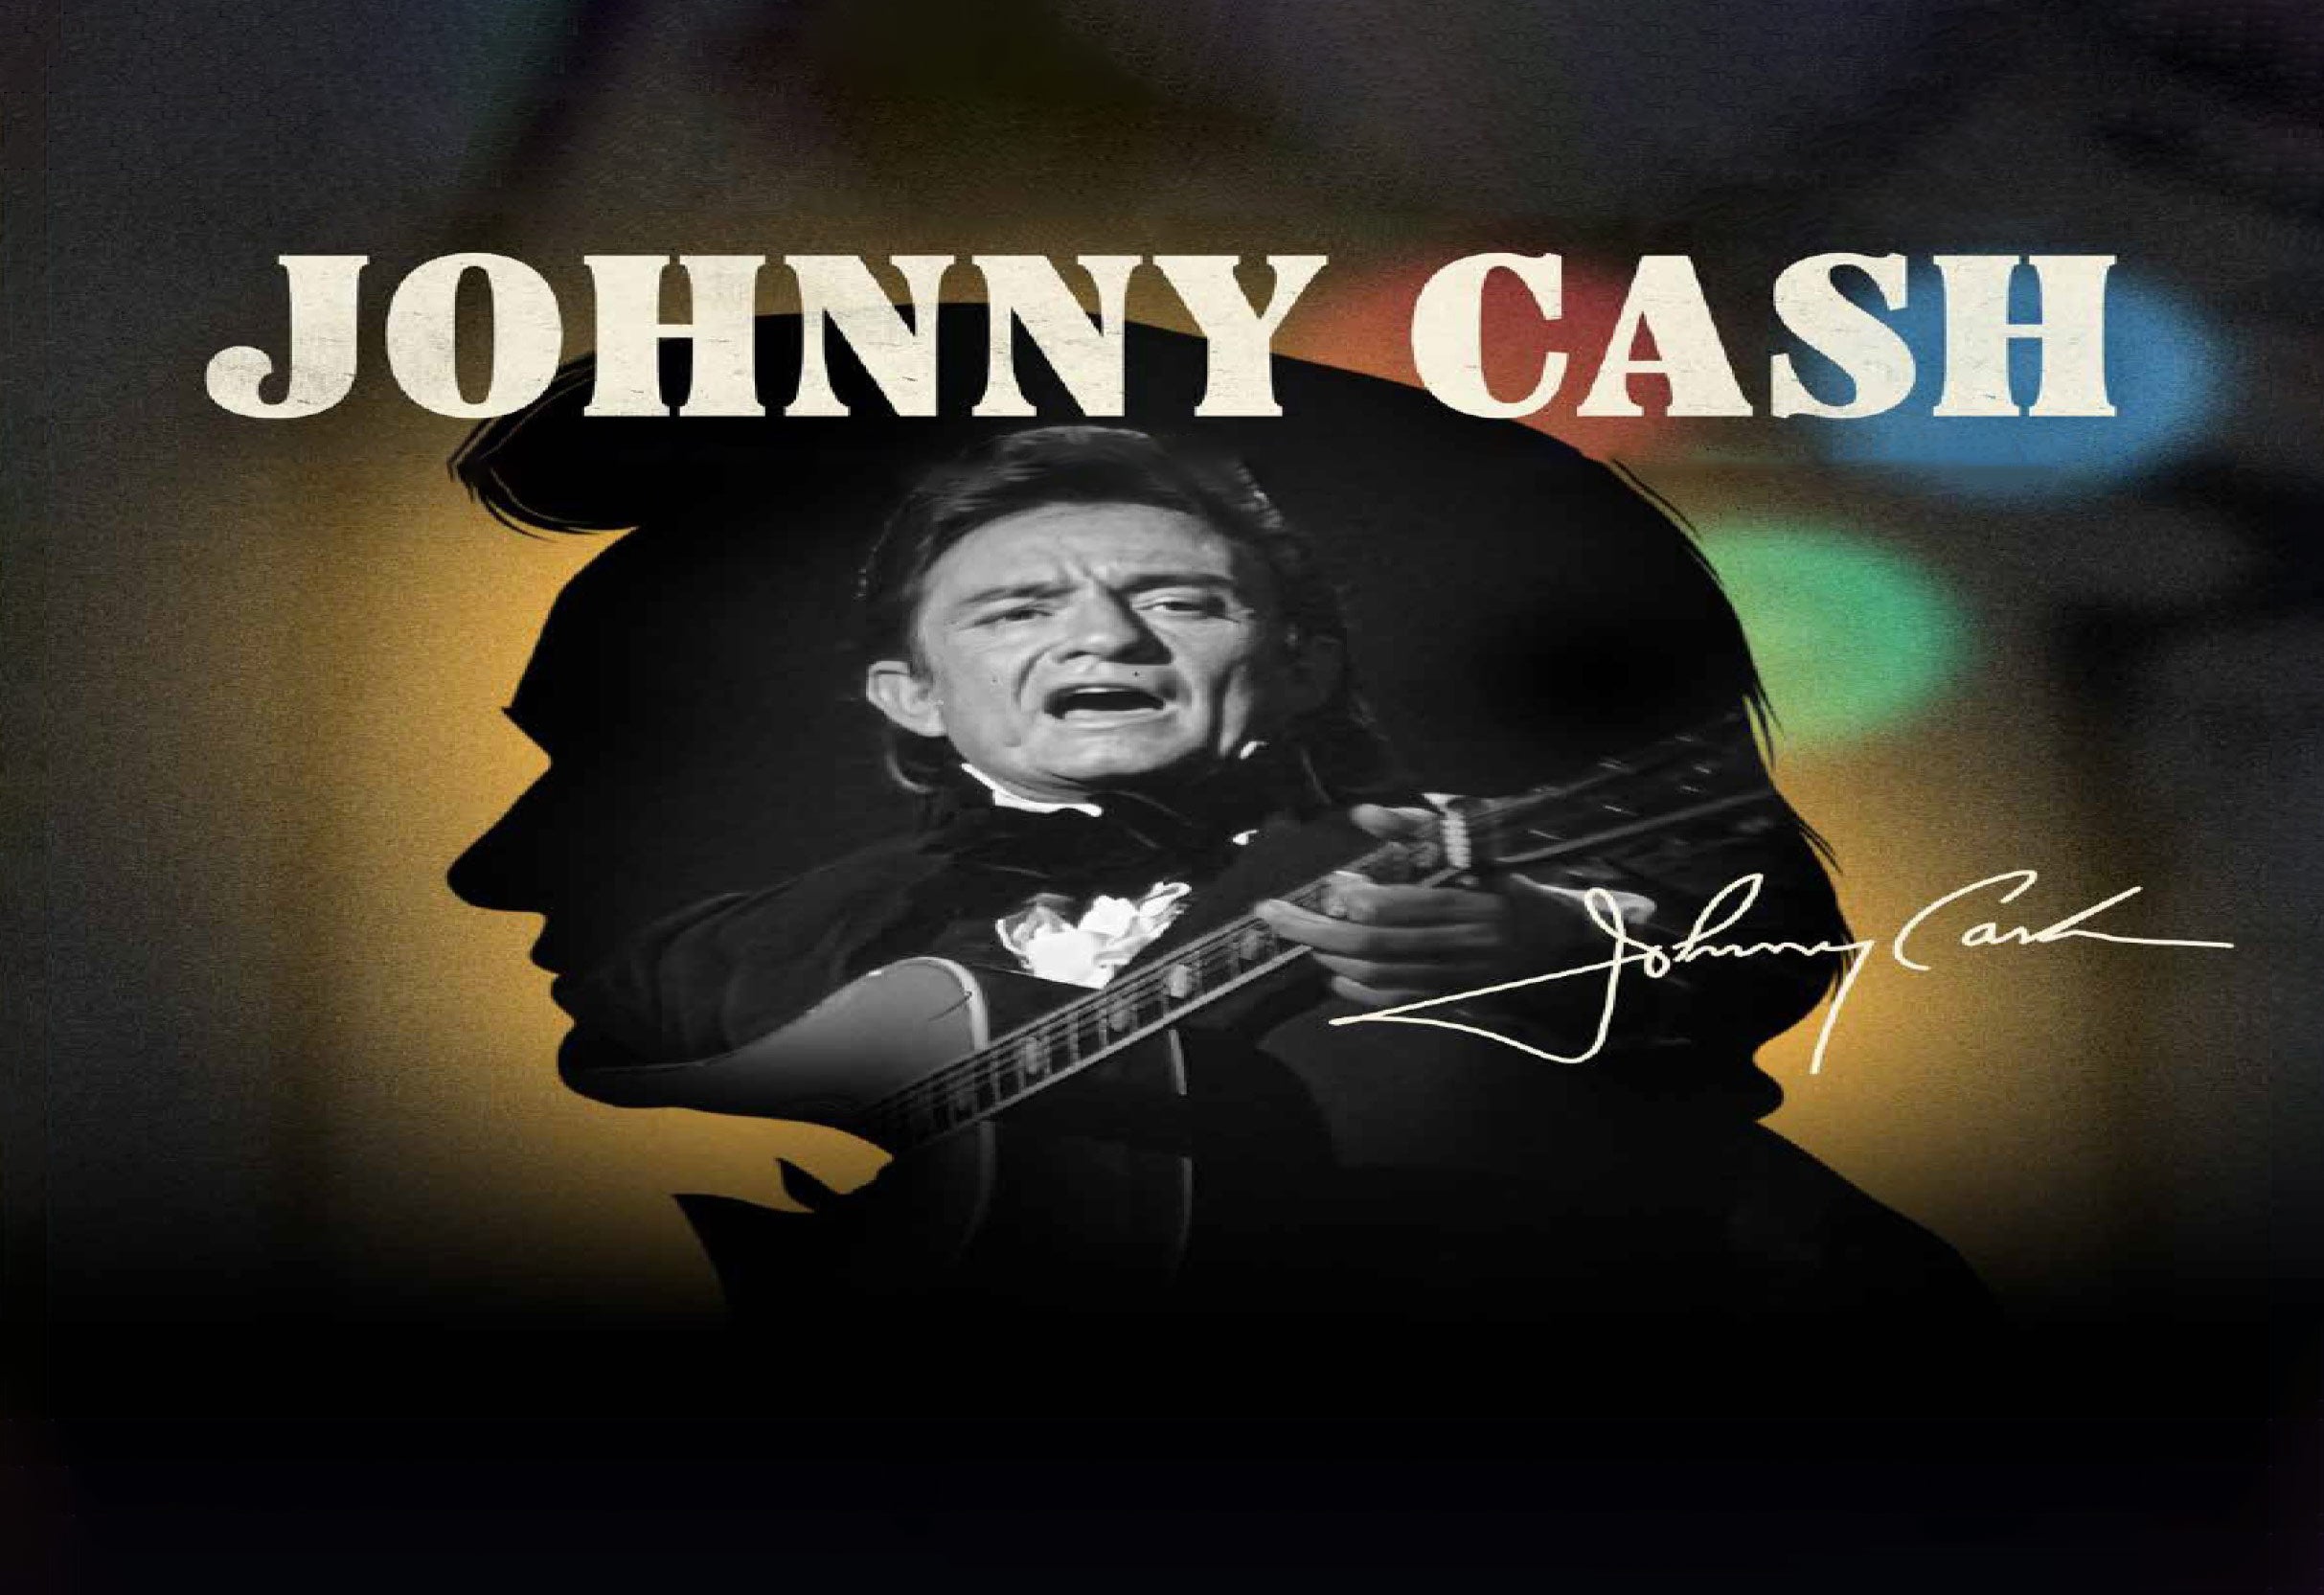 Johnny Cash - The Official Concert Experience free presale info for show tickets in Corpus Christi, TX (American Bank Center Selena Auditorium)